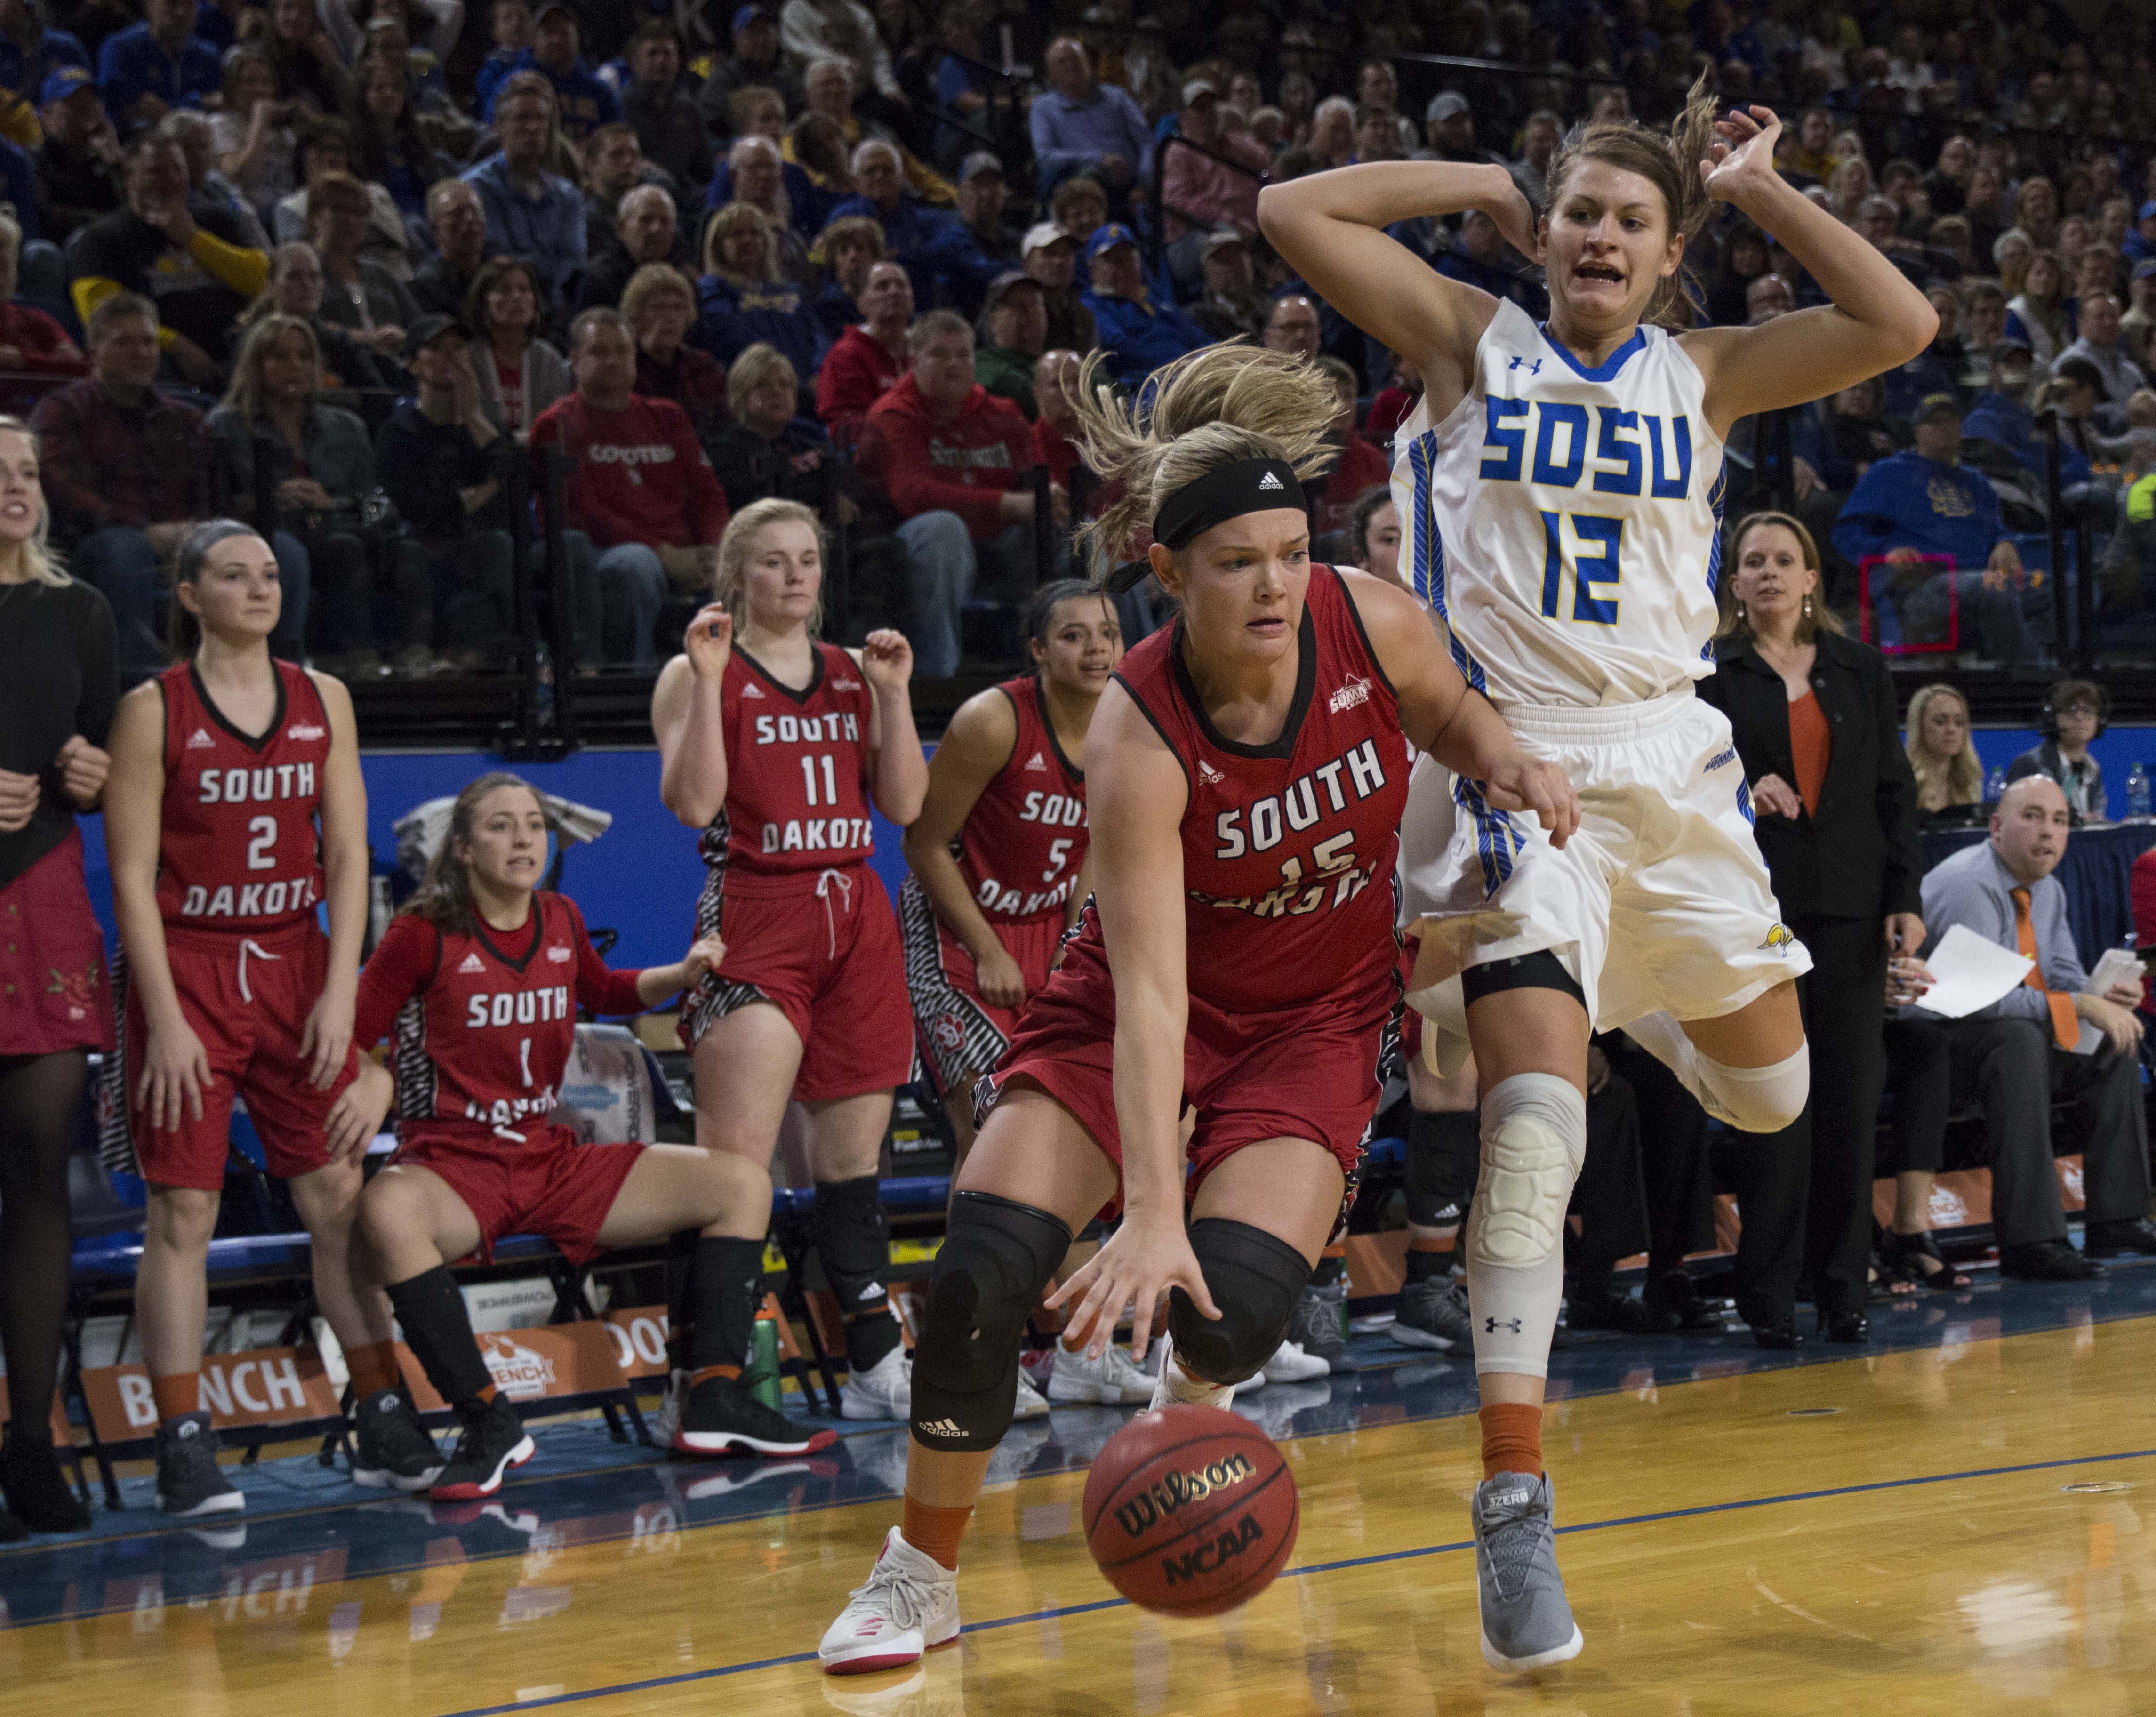 Coyote women defeat SDSU Jackrabbits 67-61, rise to no. 1 ranking in Summit League